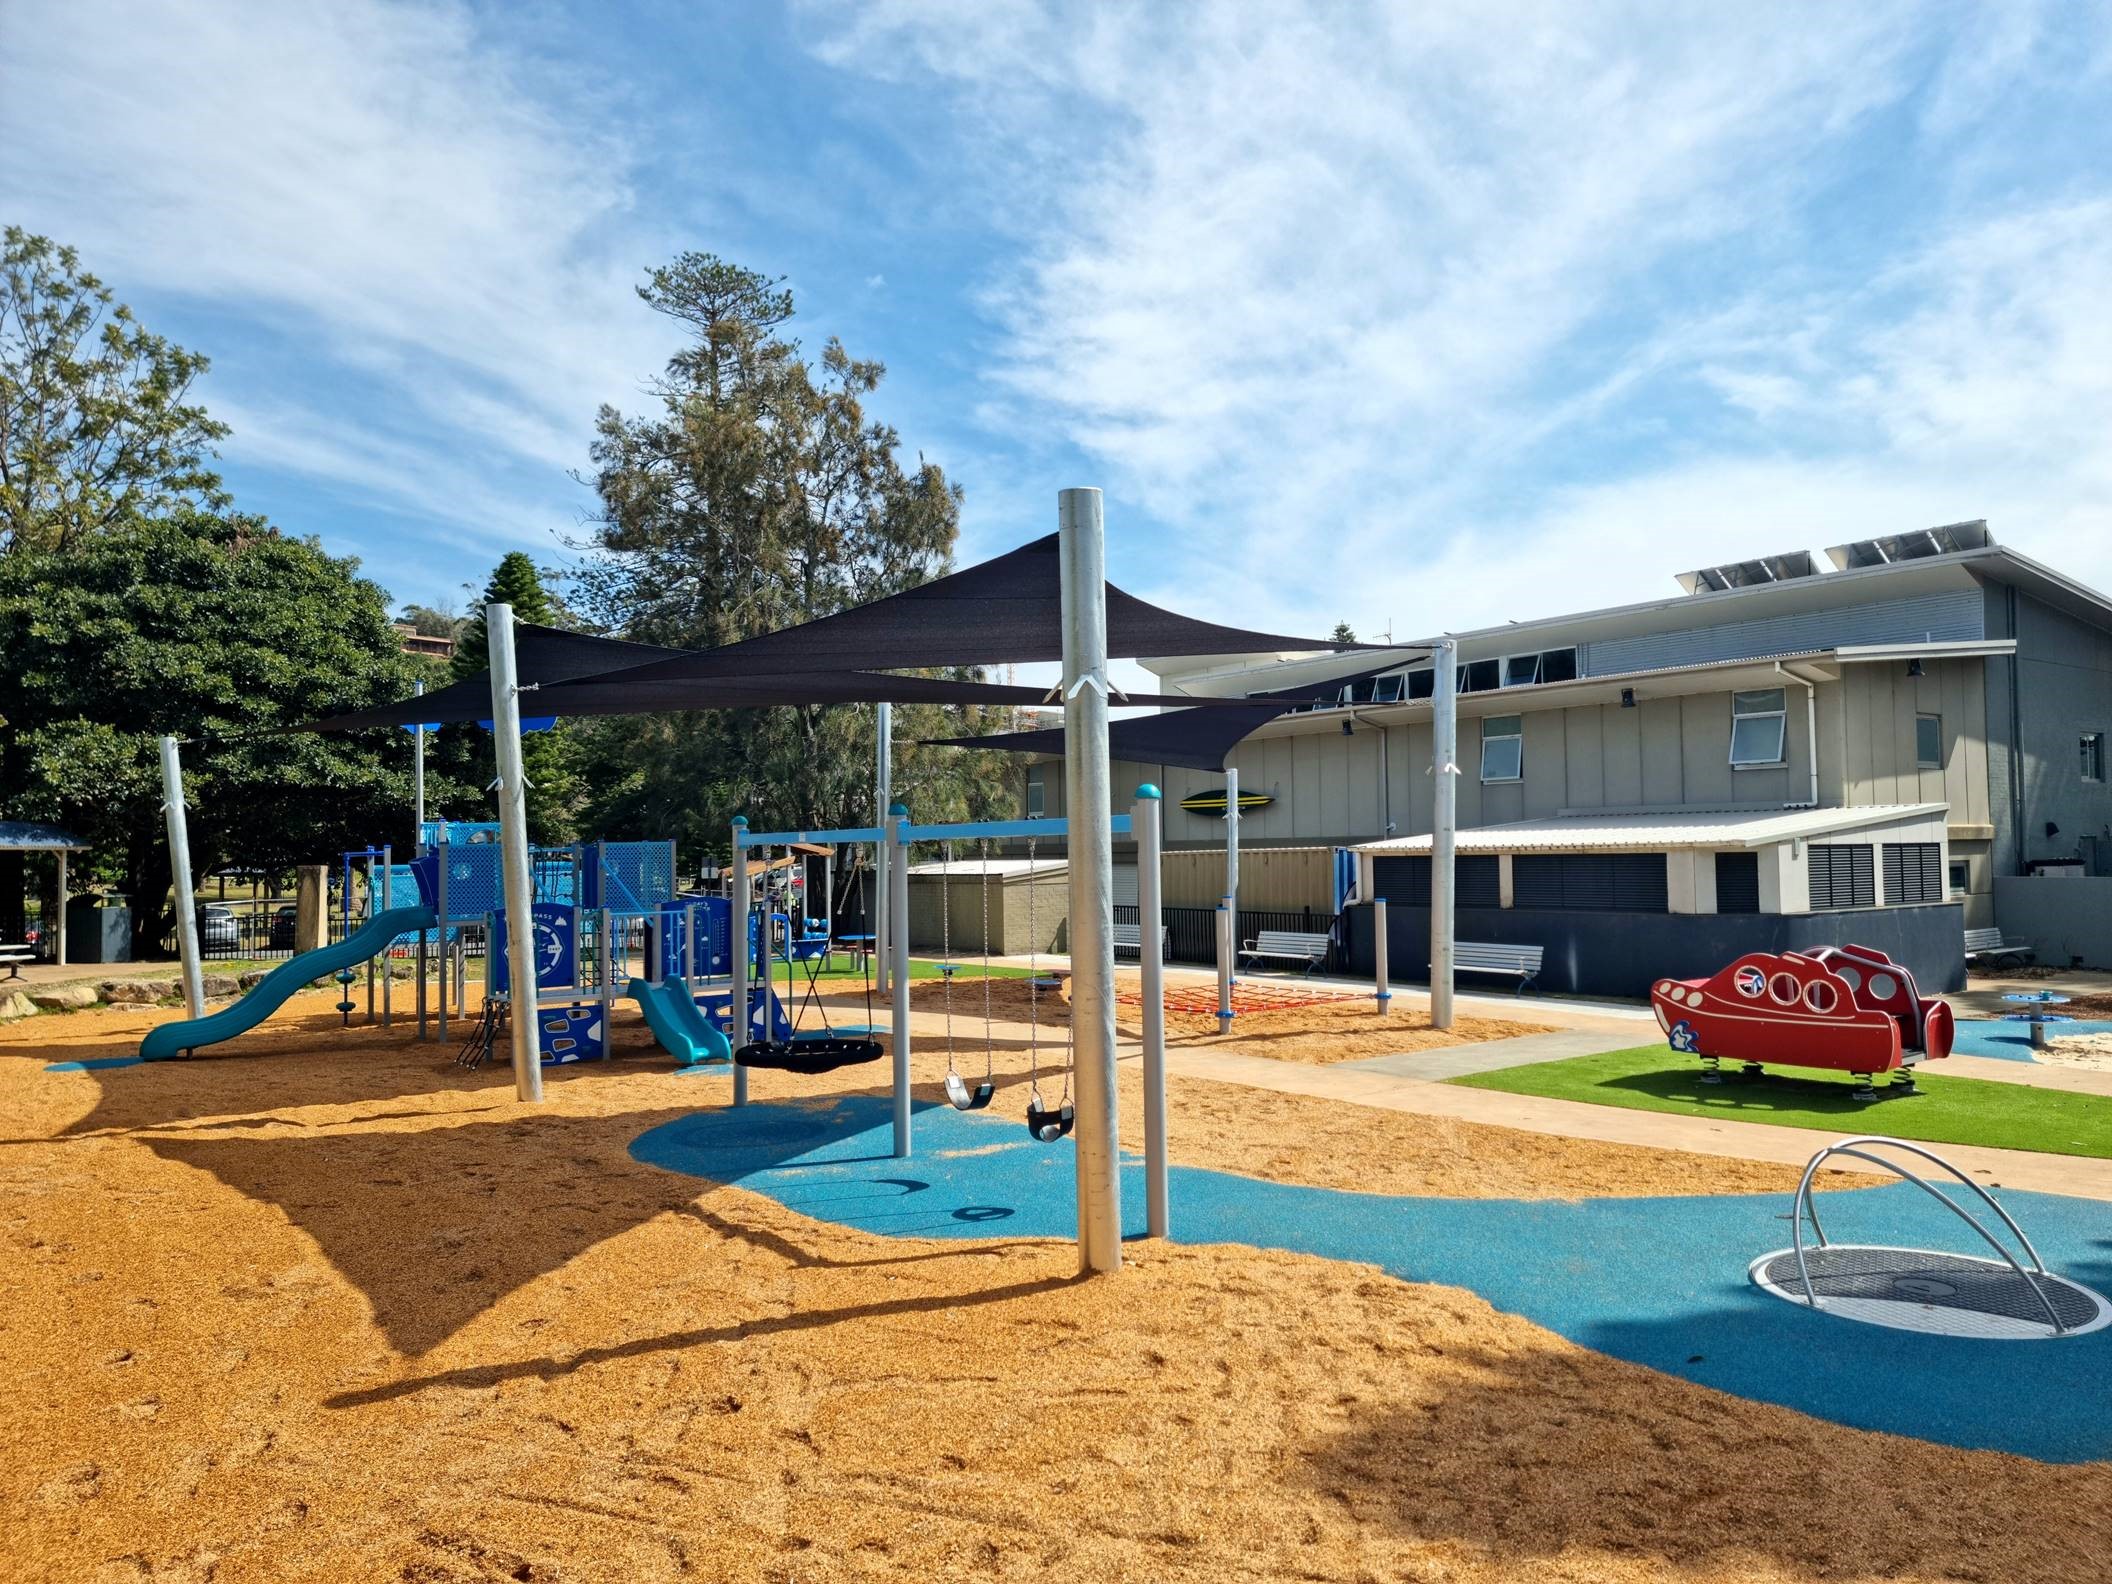 new play equipment with sun shelter, swings, seating, slides